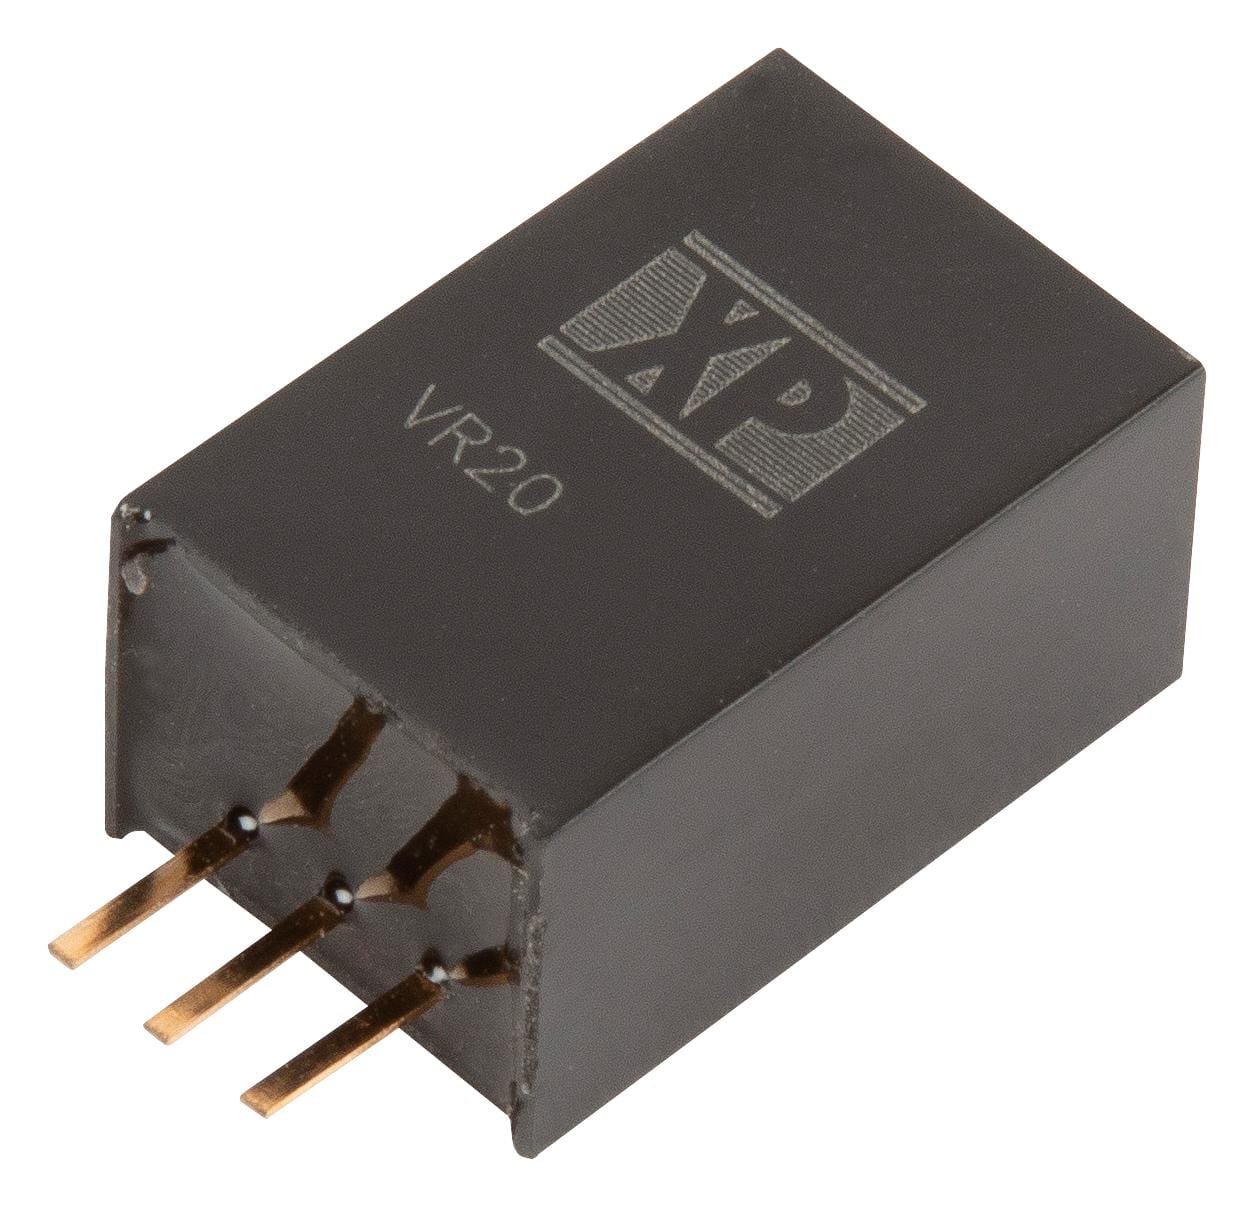 XP POWER Linear Regulator Drop In Replacement VR20S15 DC-DC CONVERTER, 15V, 2A XP POWER 3794098 VR20S15